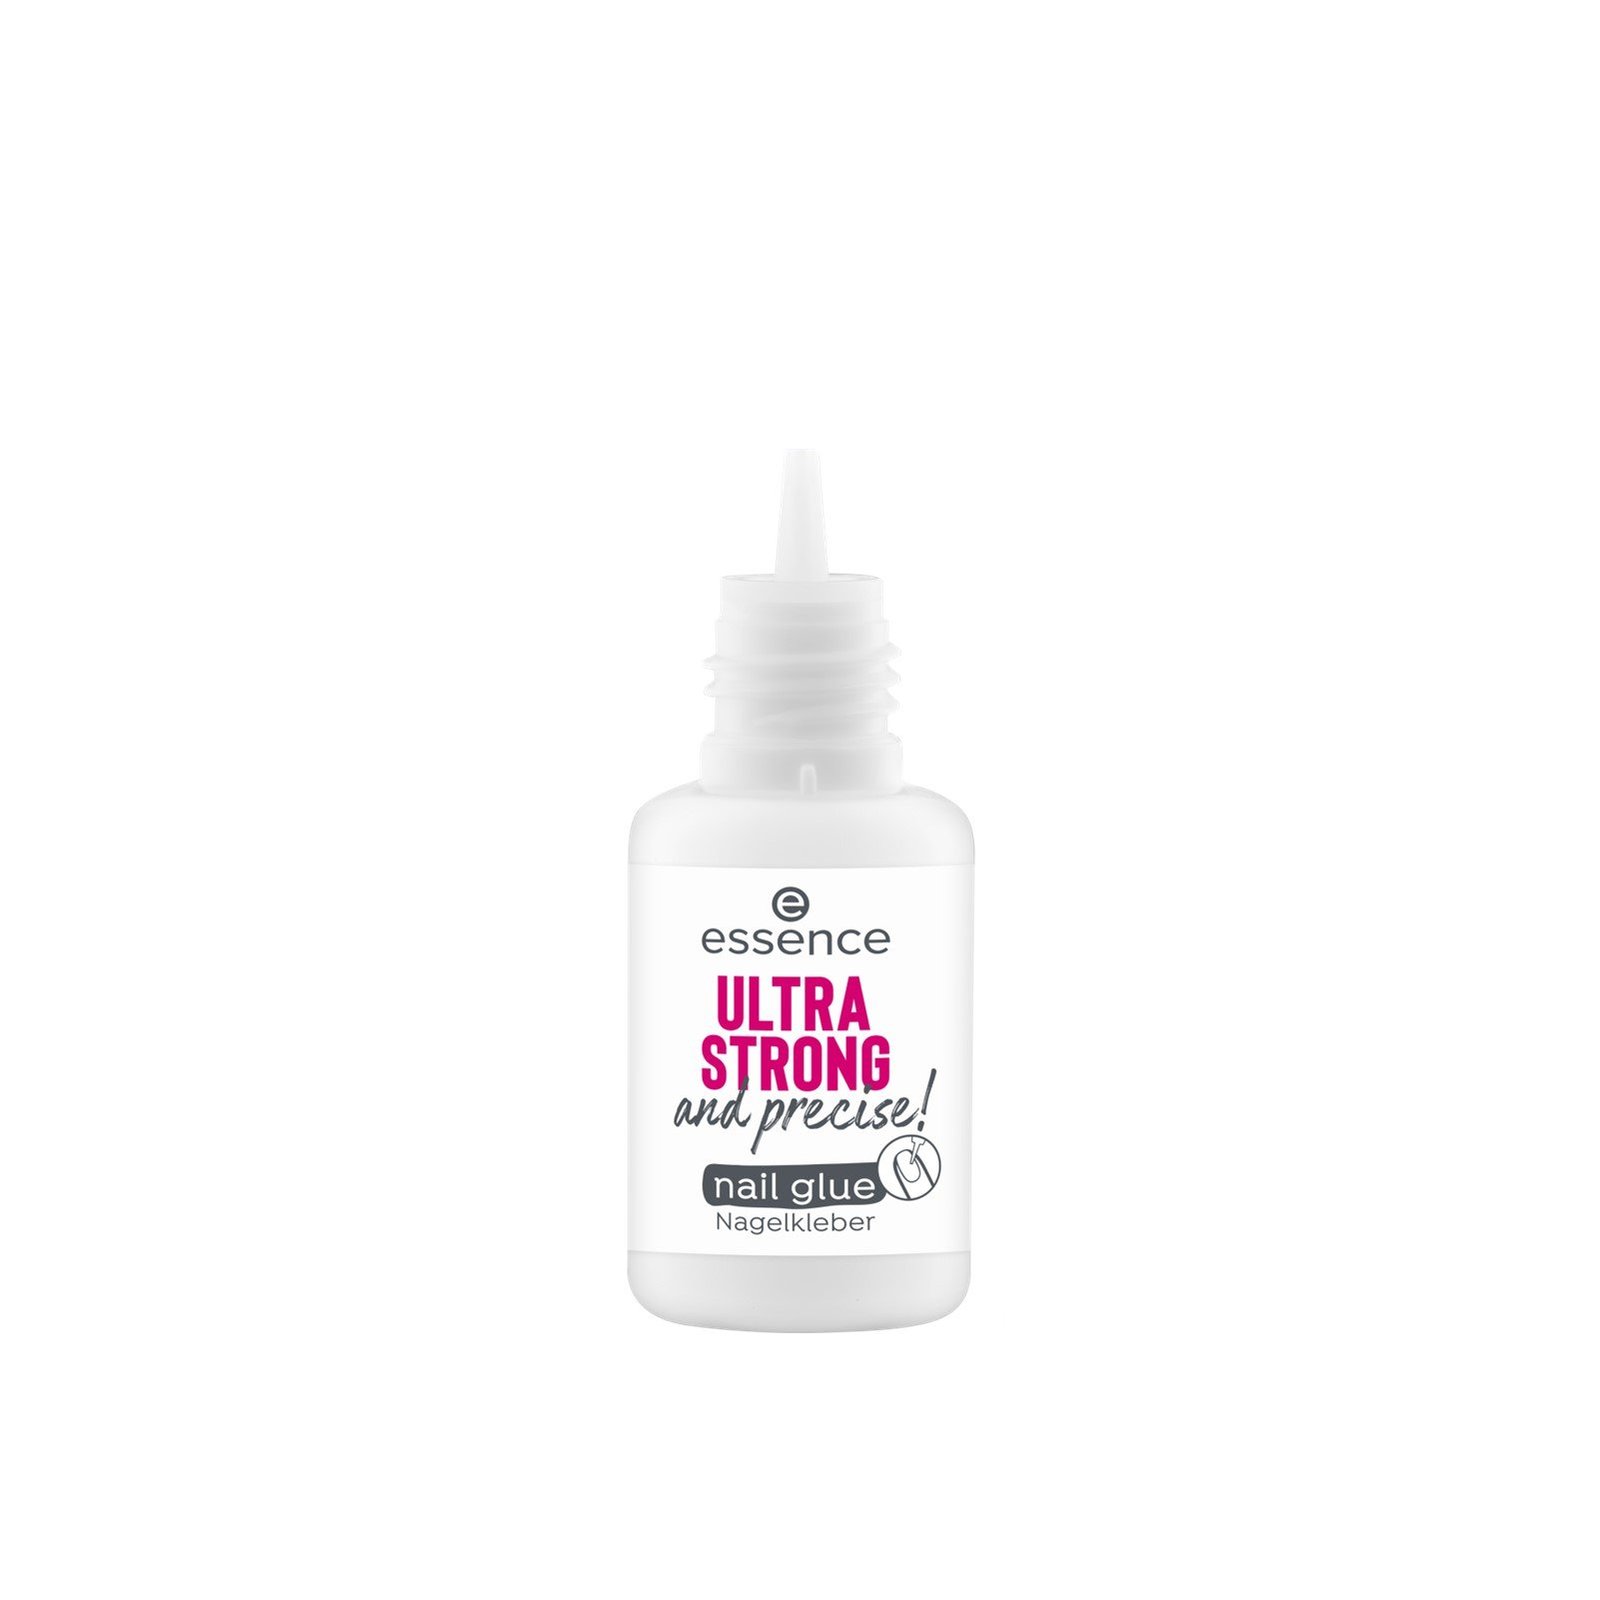 essence Ultra Strong and Precise! Nail Glue 8g (0.28oz)